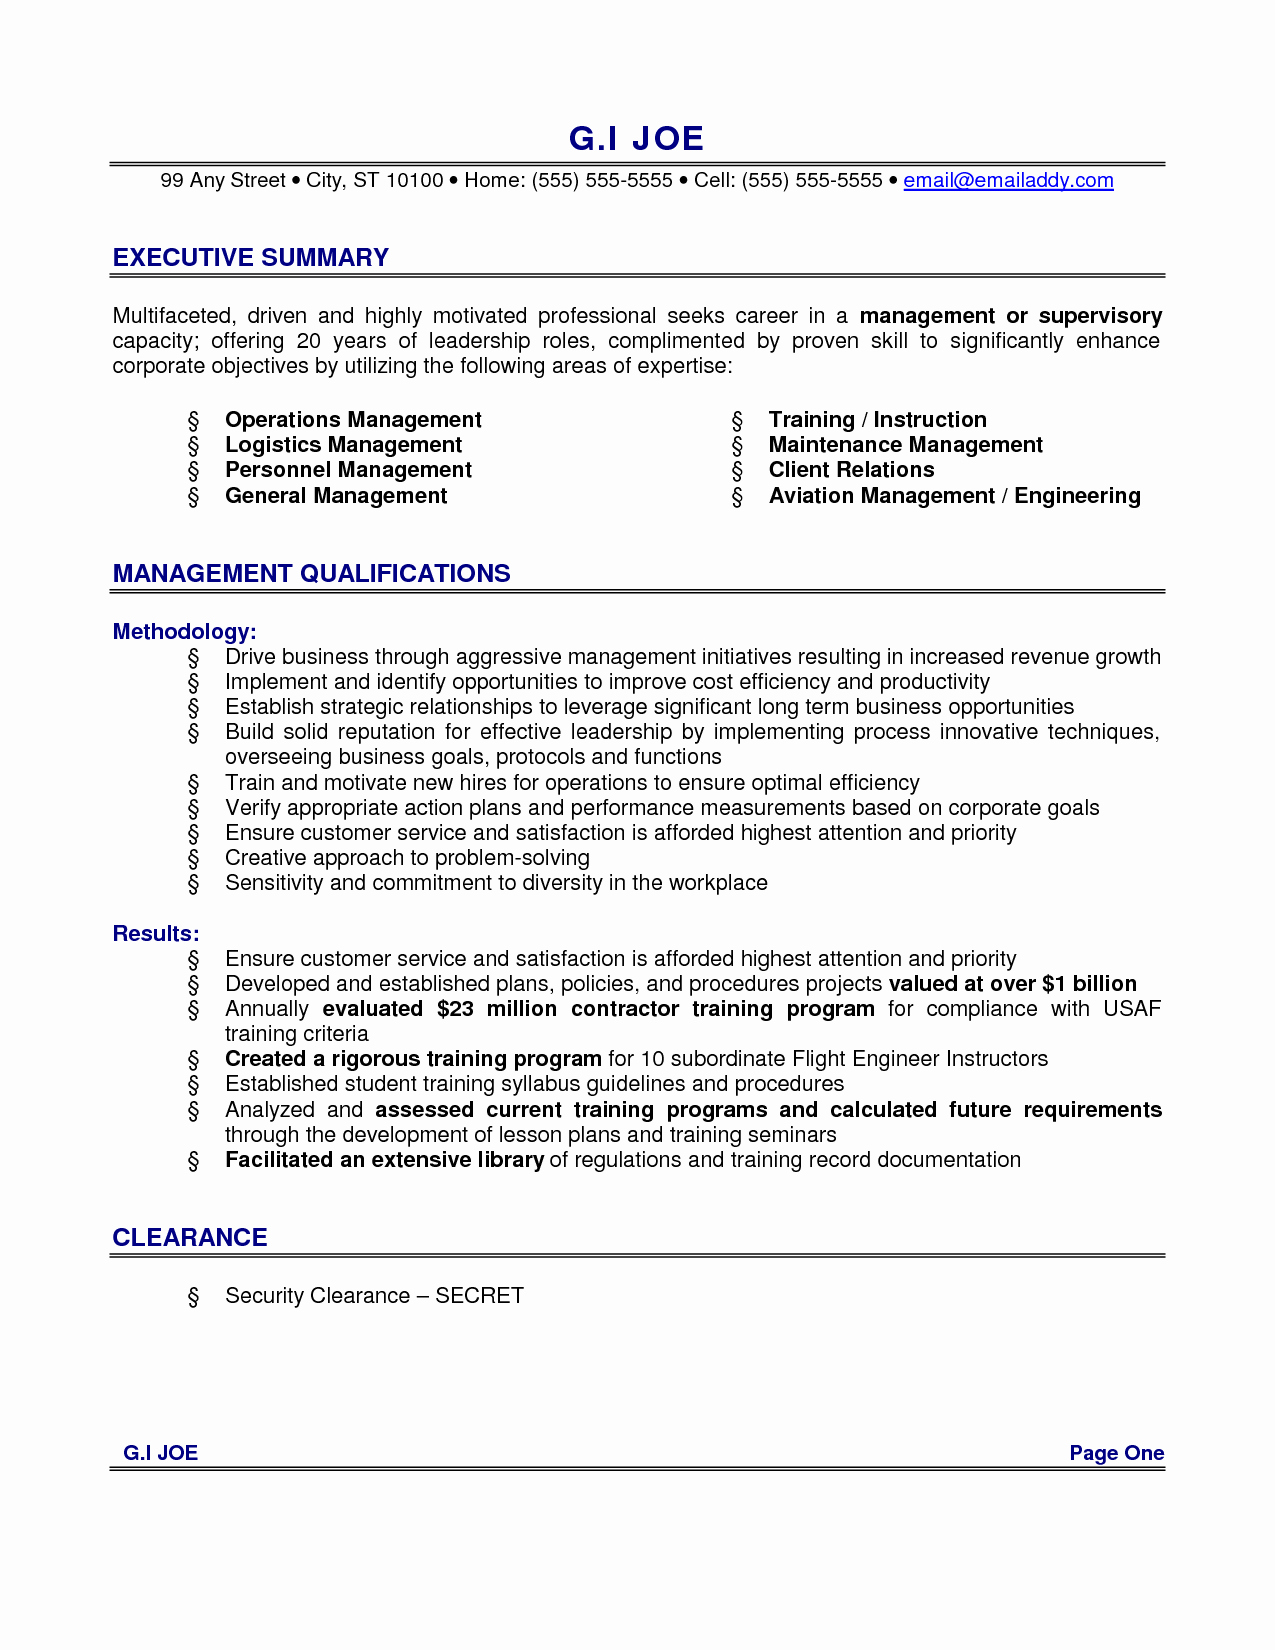 Resume Examples for Executive Summary with Management